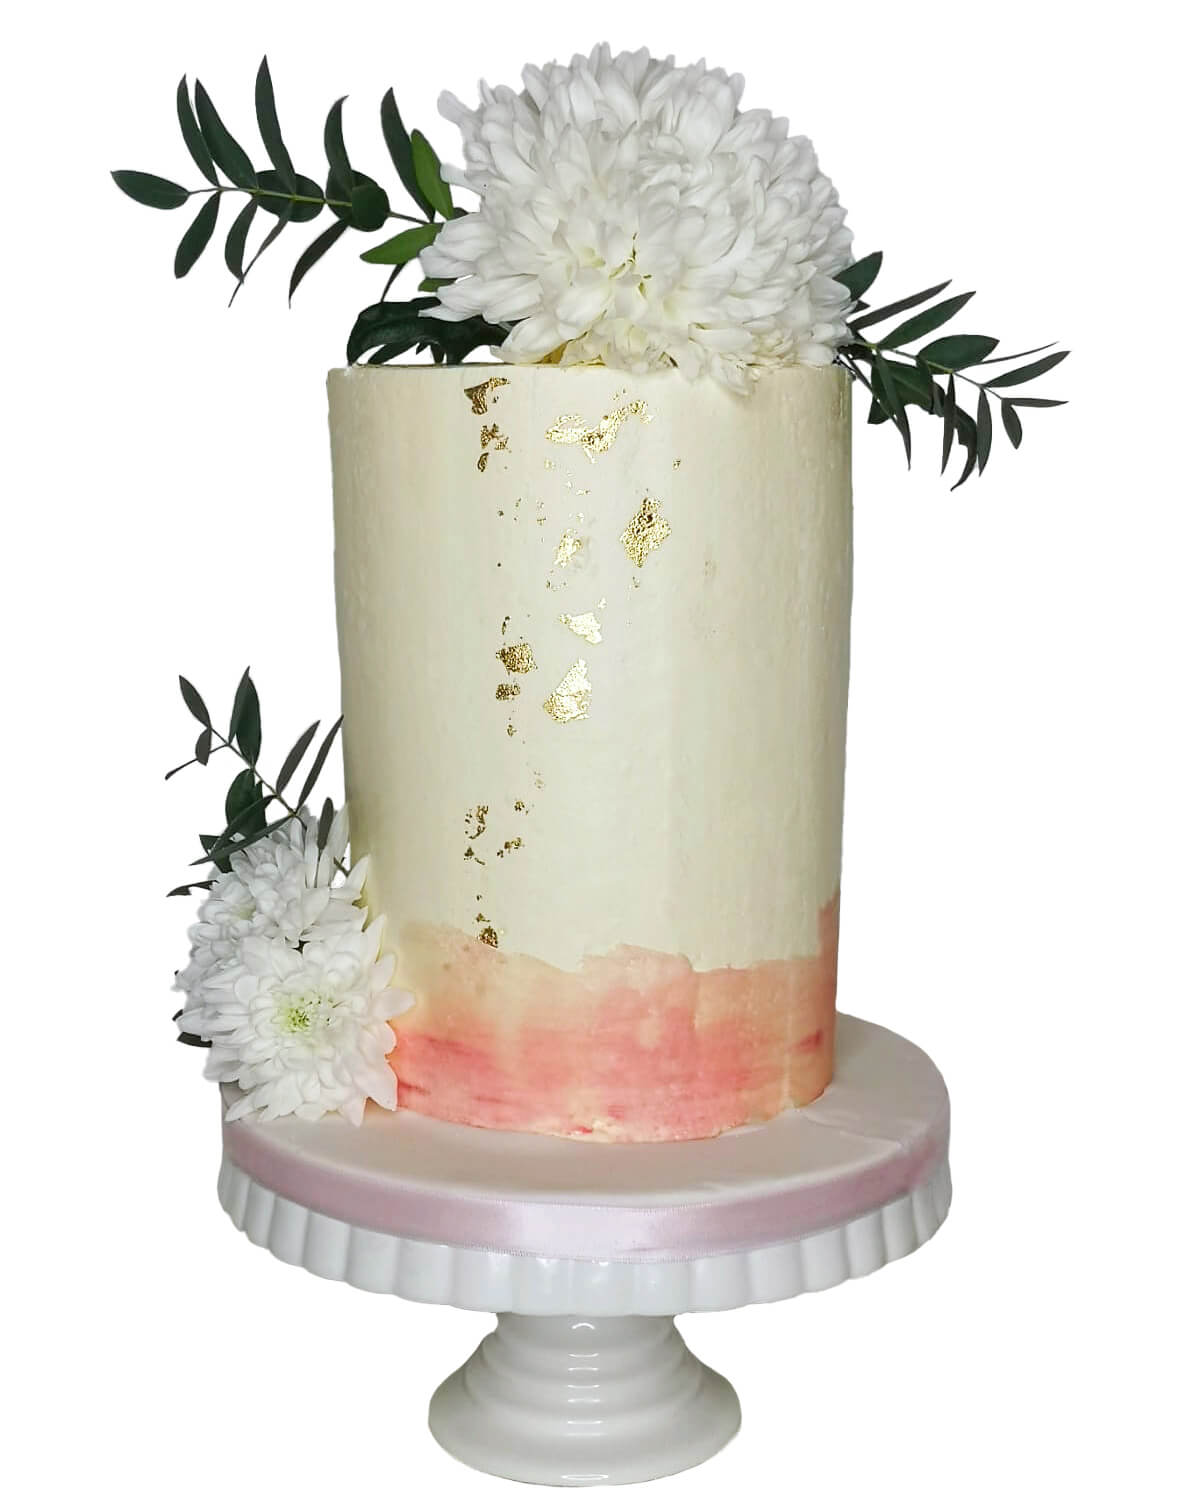 Tall White Wedding Cake Sits On A Big Cake Stand Background, Picture Of A Wedding  Cake Background Image And Wallpaper for Free Download